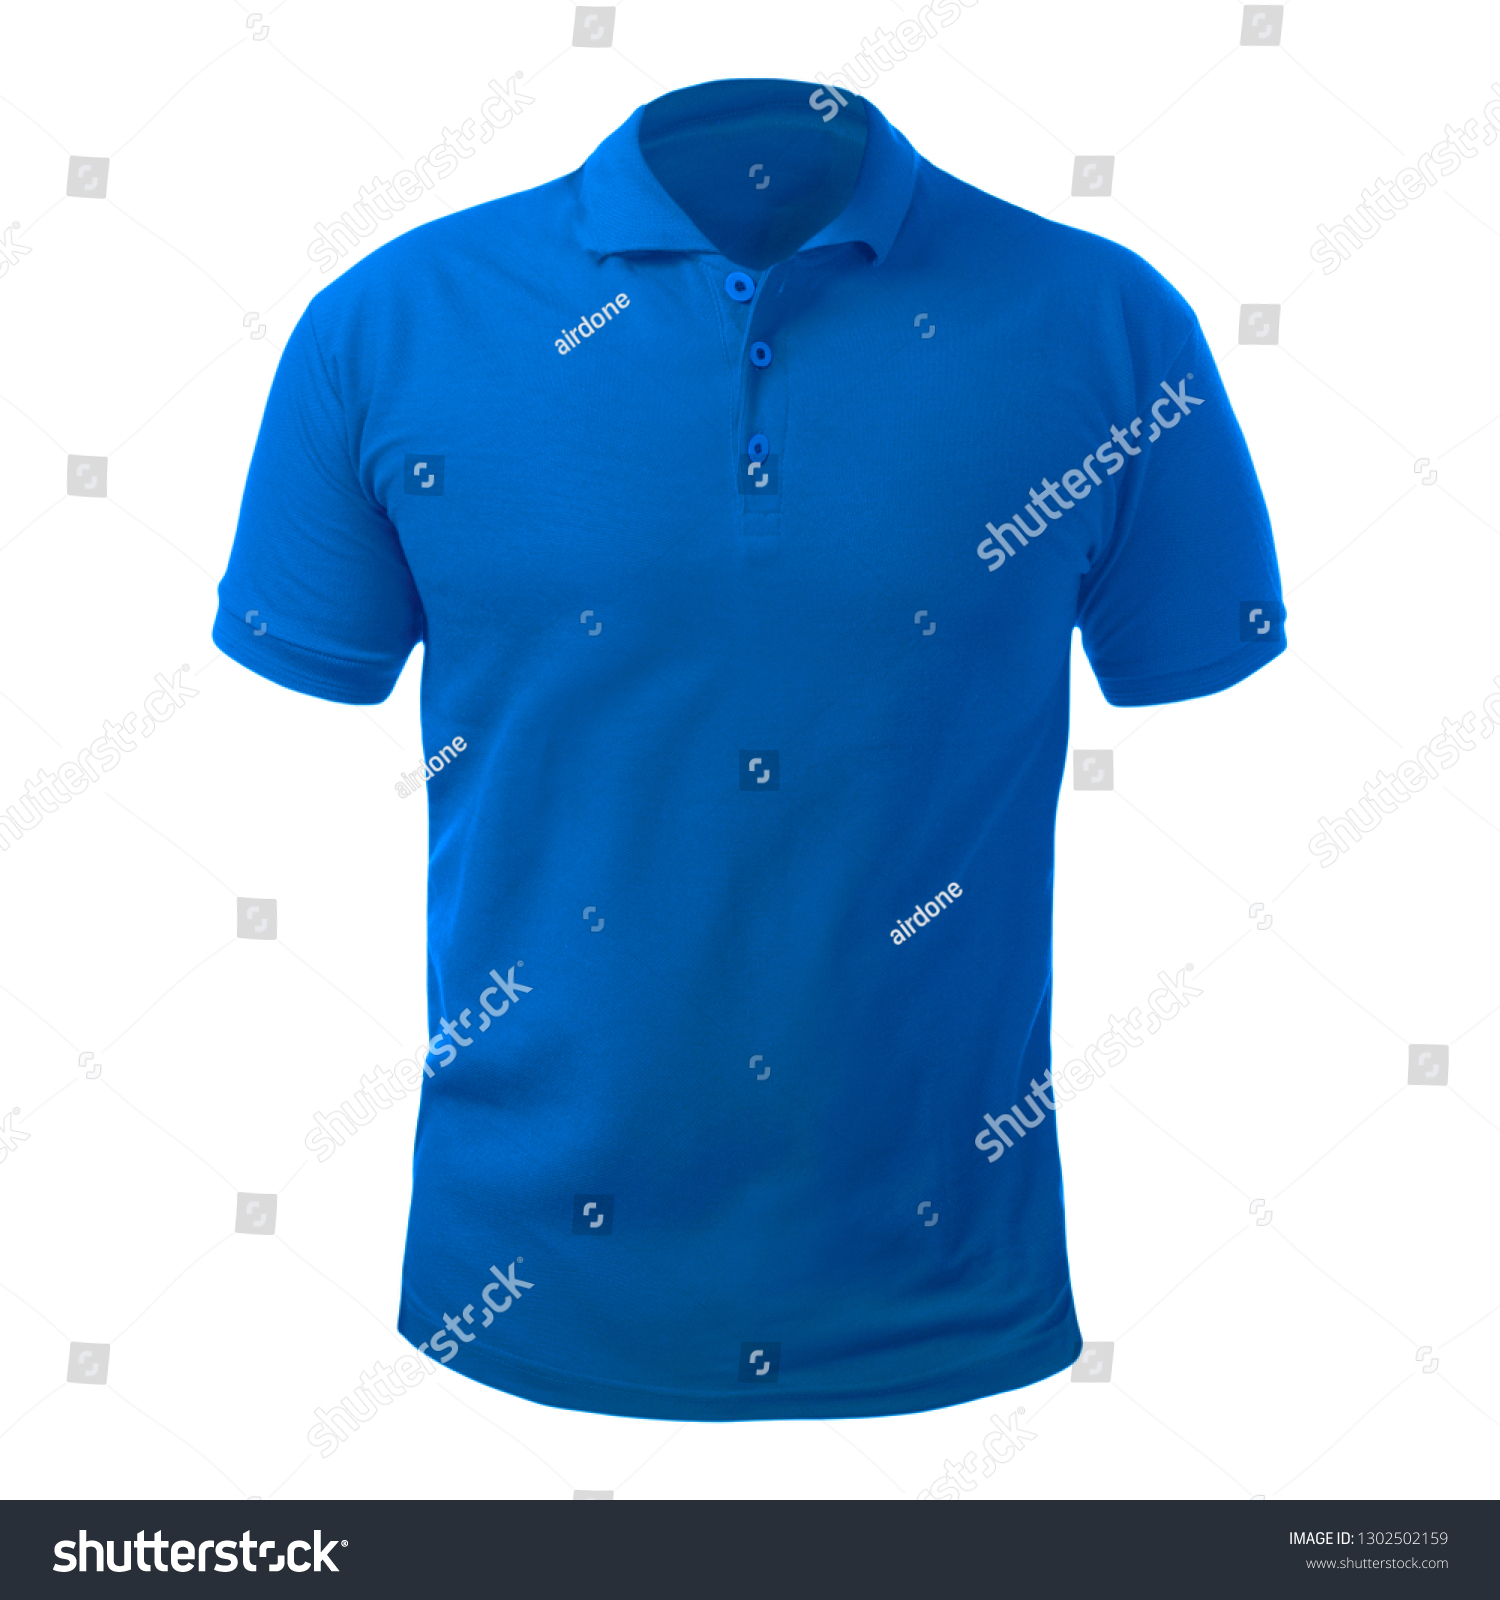 Blank Collared Shirt Mock Template Front Stock Photo 1302502159 ...